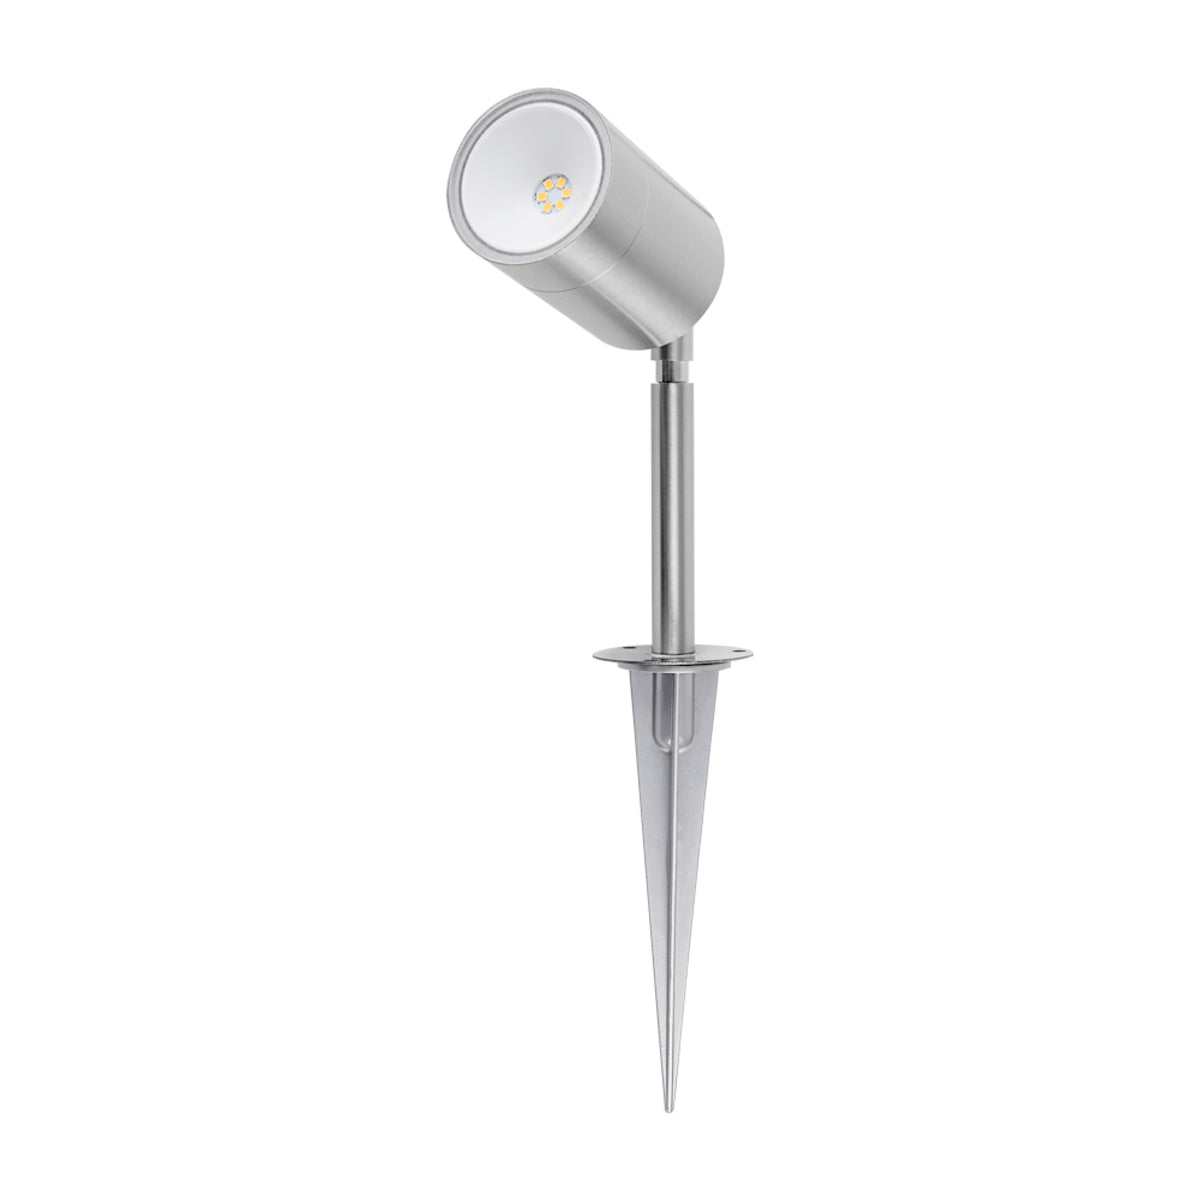 LAMPARA TIPO ESTACA PARA JARDIN LED 4.5W 3000K 300LM HLED-756/S HLED-756/S